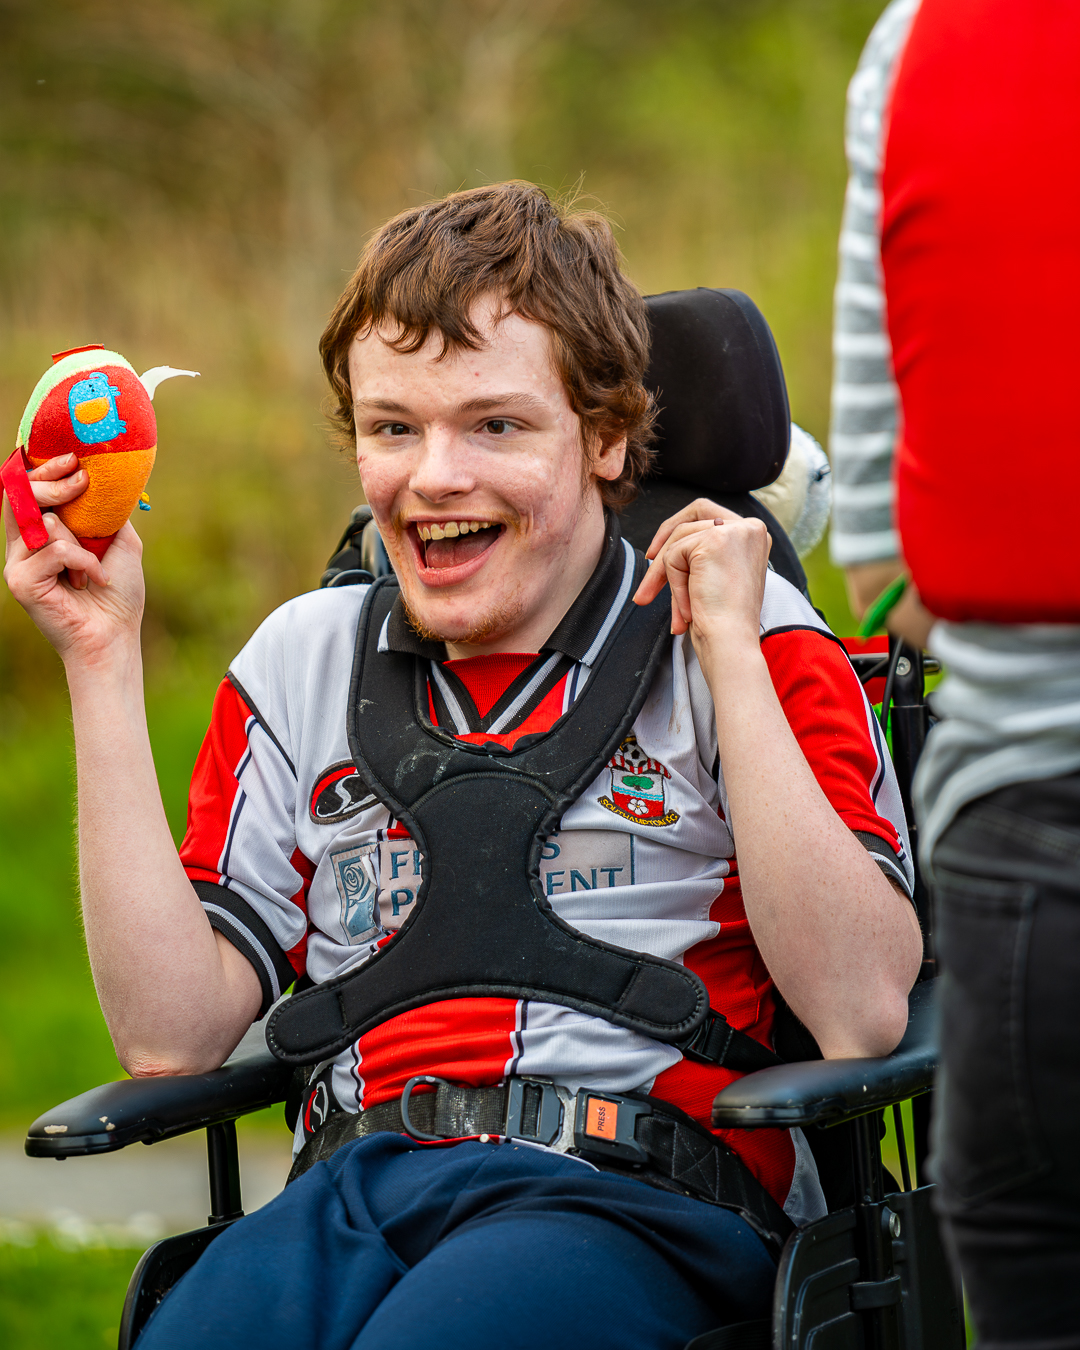 A guest wearing a red and white football shirt is in a wheelchair and smiling with an open mouth towards the camera. He is holding a toy in his hand.